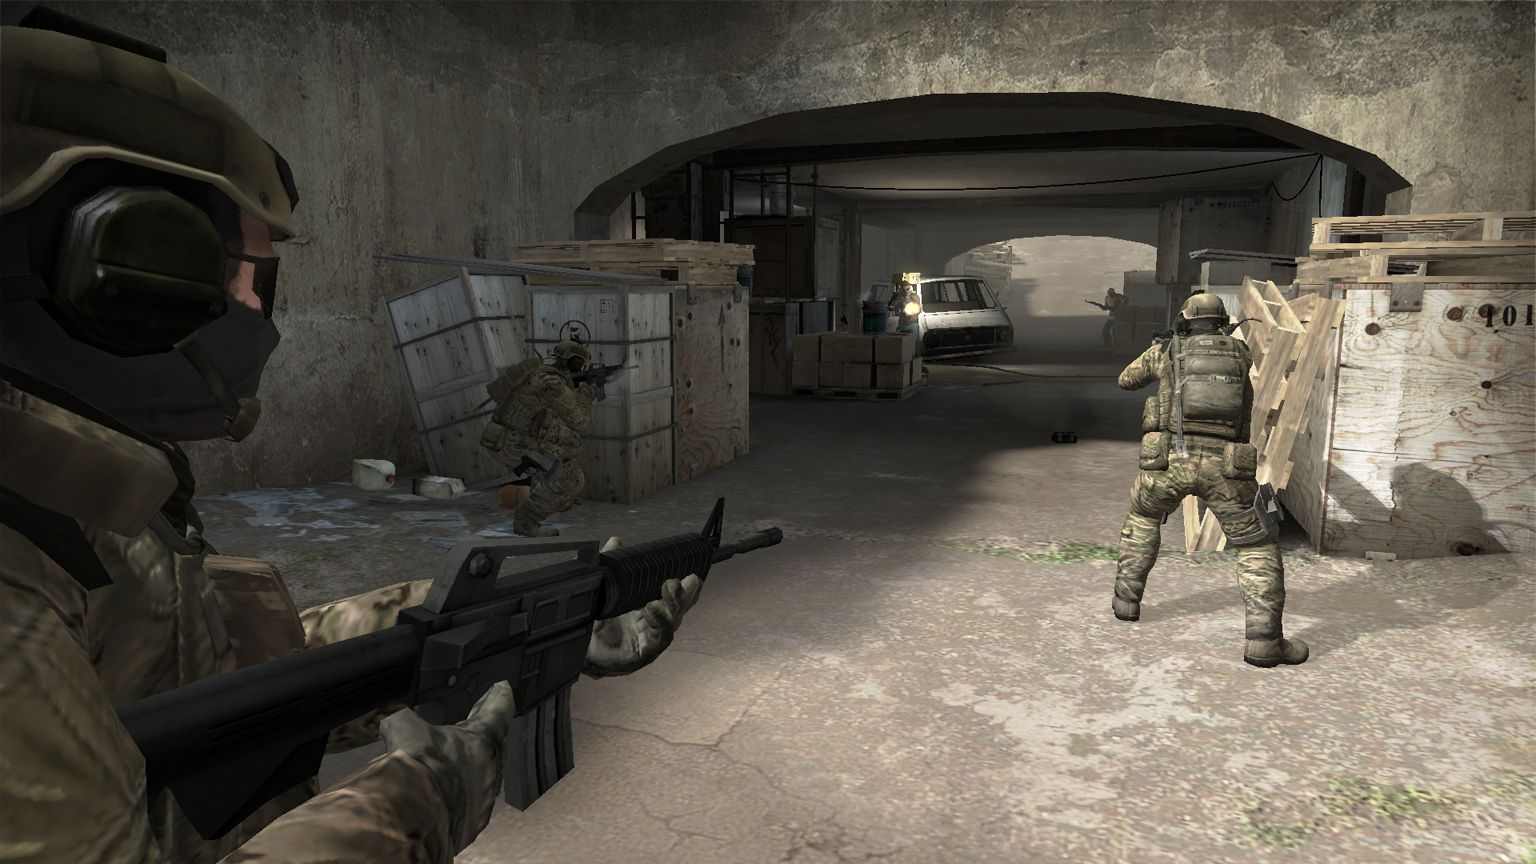 counter strike play download free